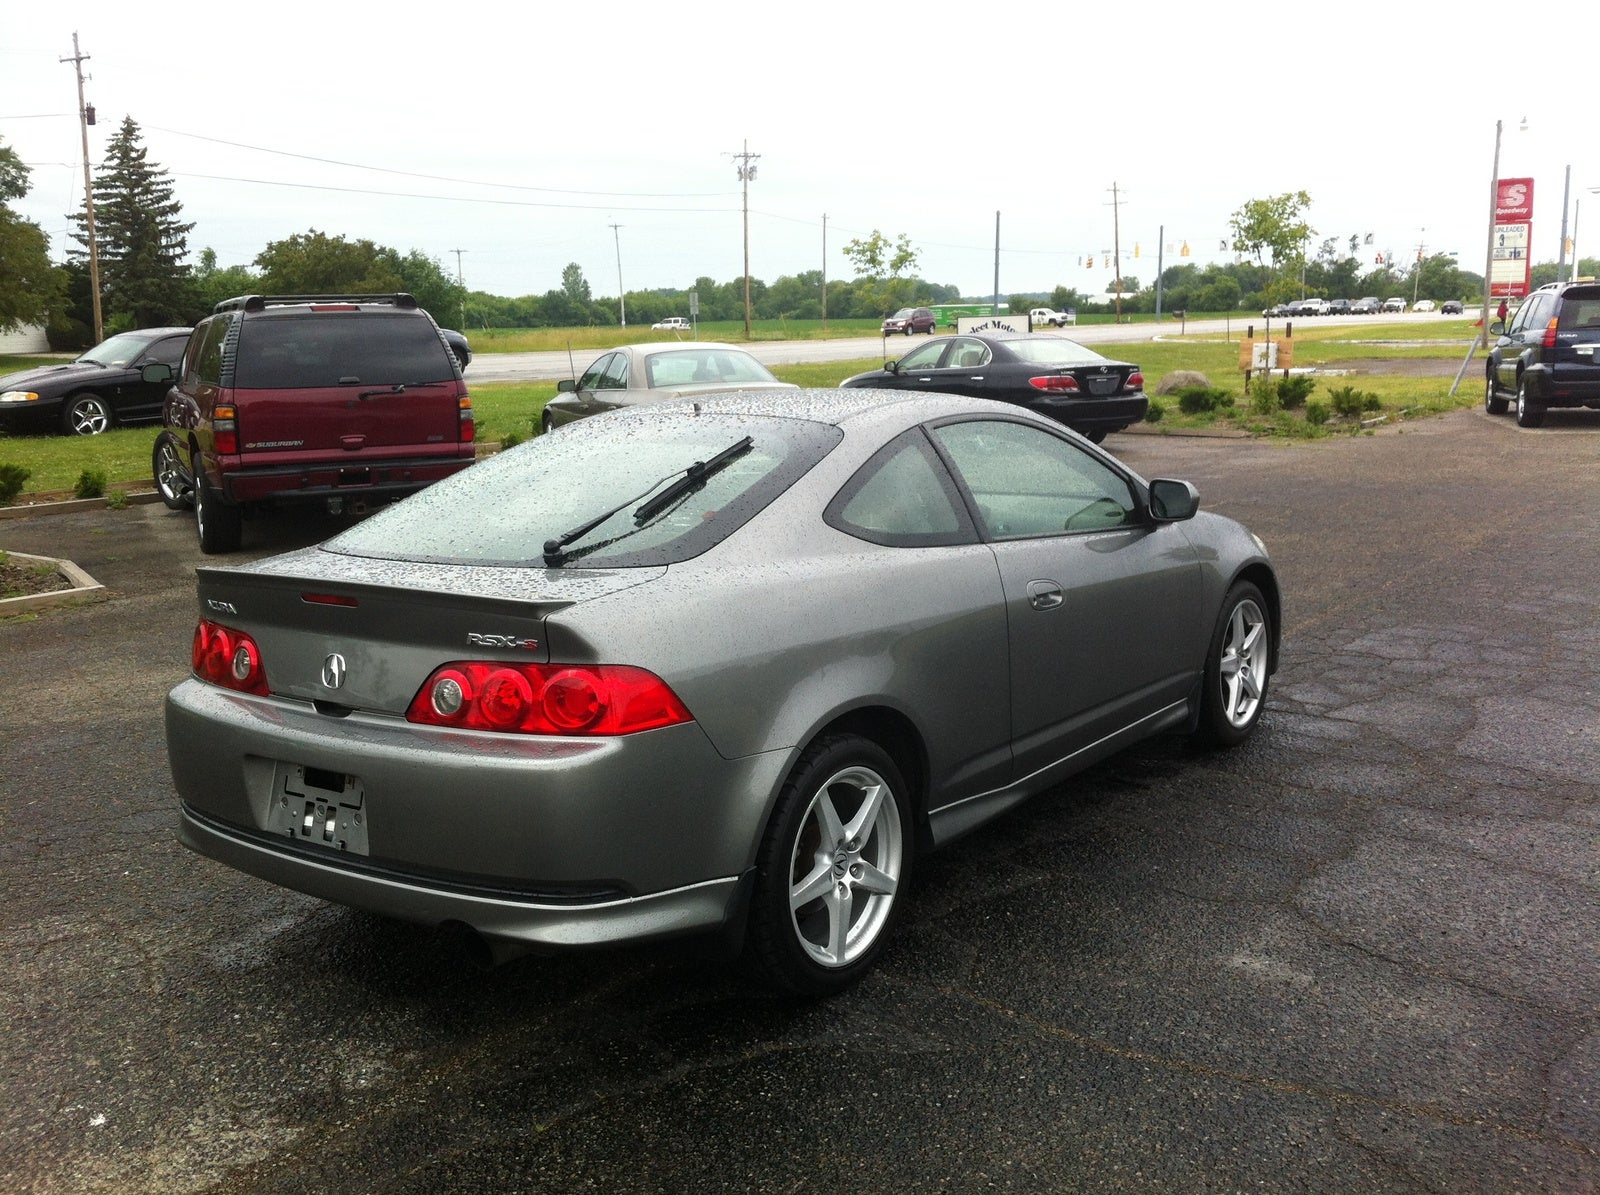 Acura RSX 2006 Coupe Type S. RSX. 